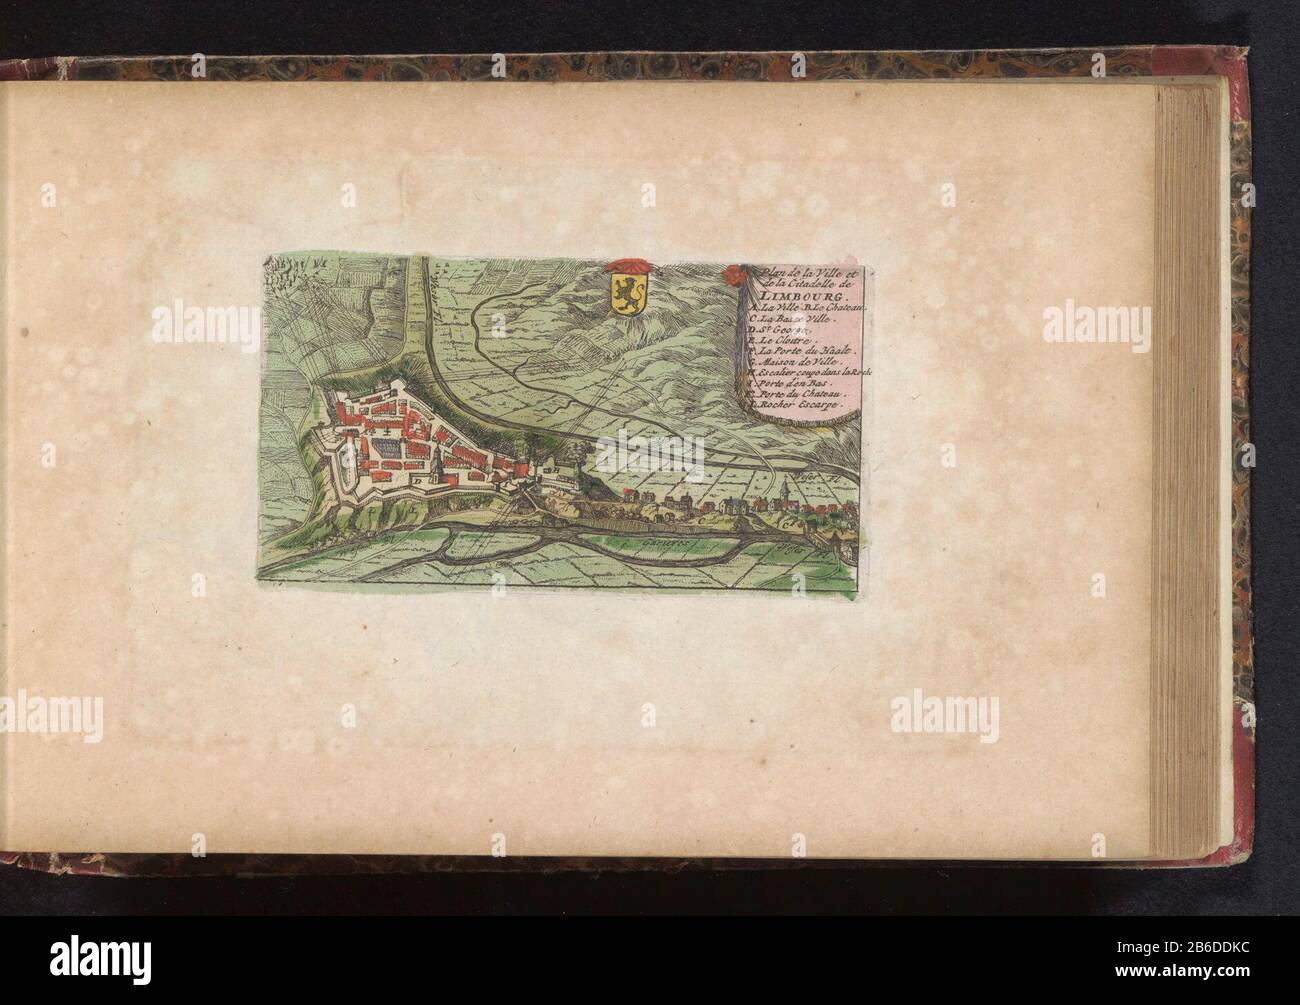 Bombardment Of Limbourg By The Allies 1703 Plan De La Ville Et De La Citadelle The Limbourg Title Object Card In A Nutshell With The Shelling Of The City Of Liege Limbourg